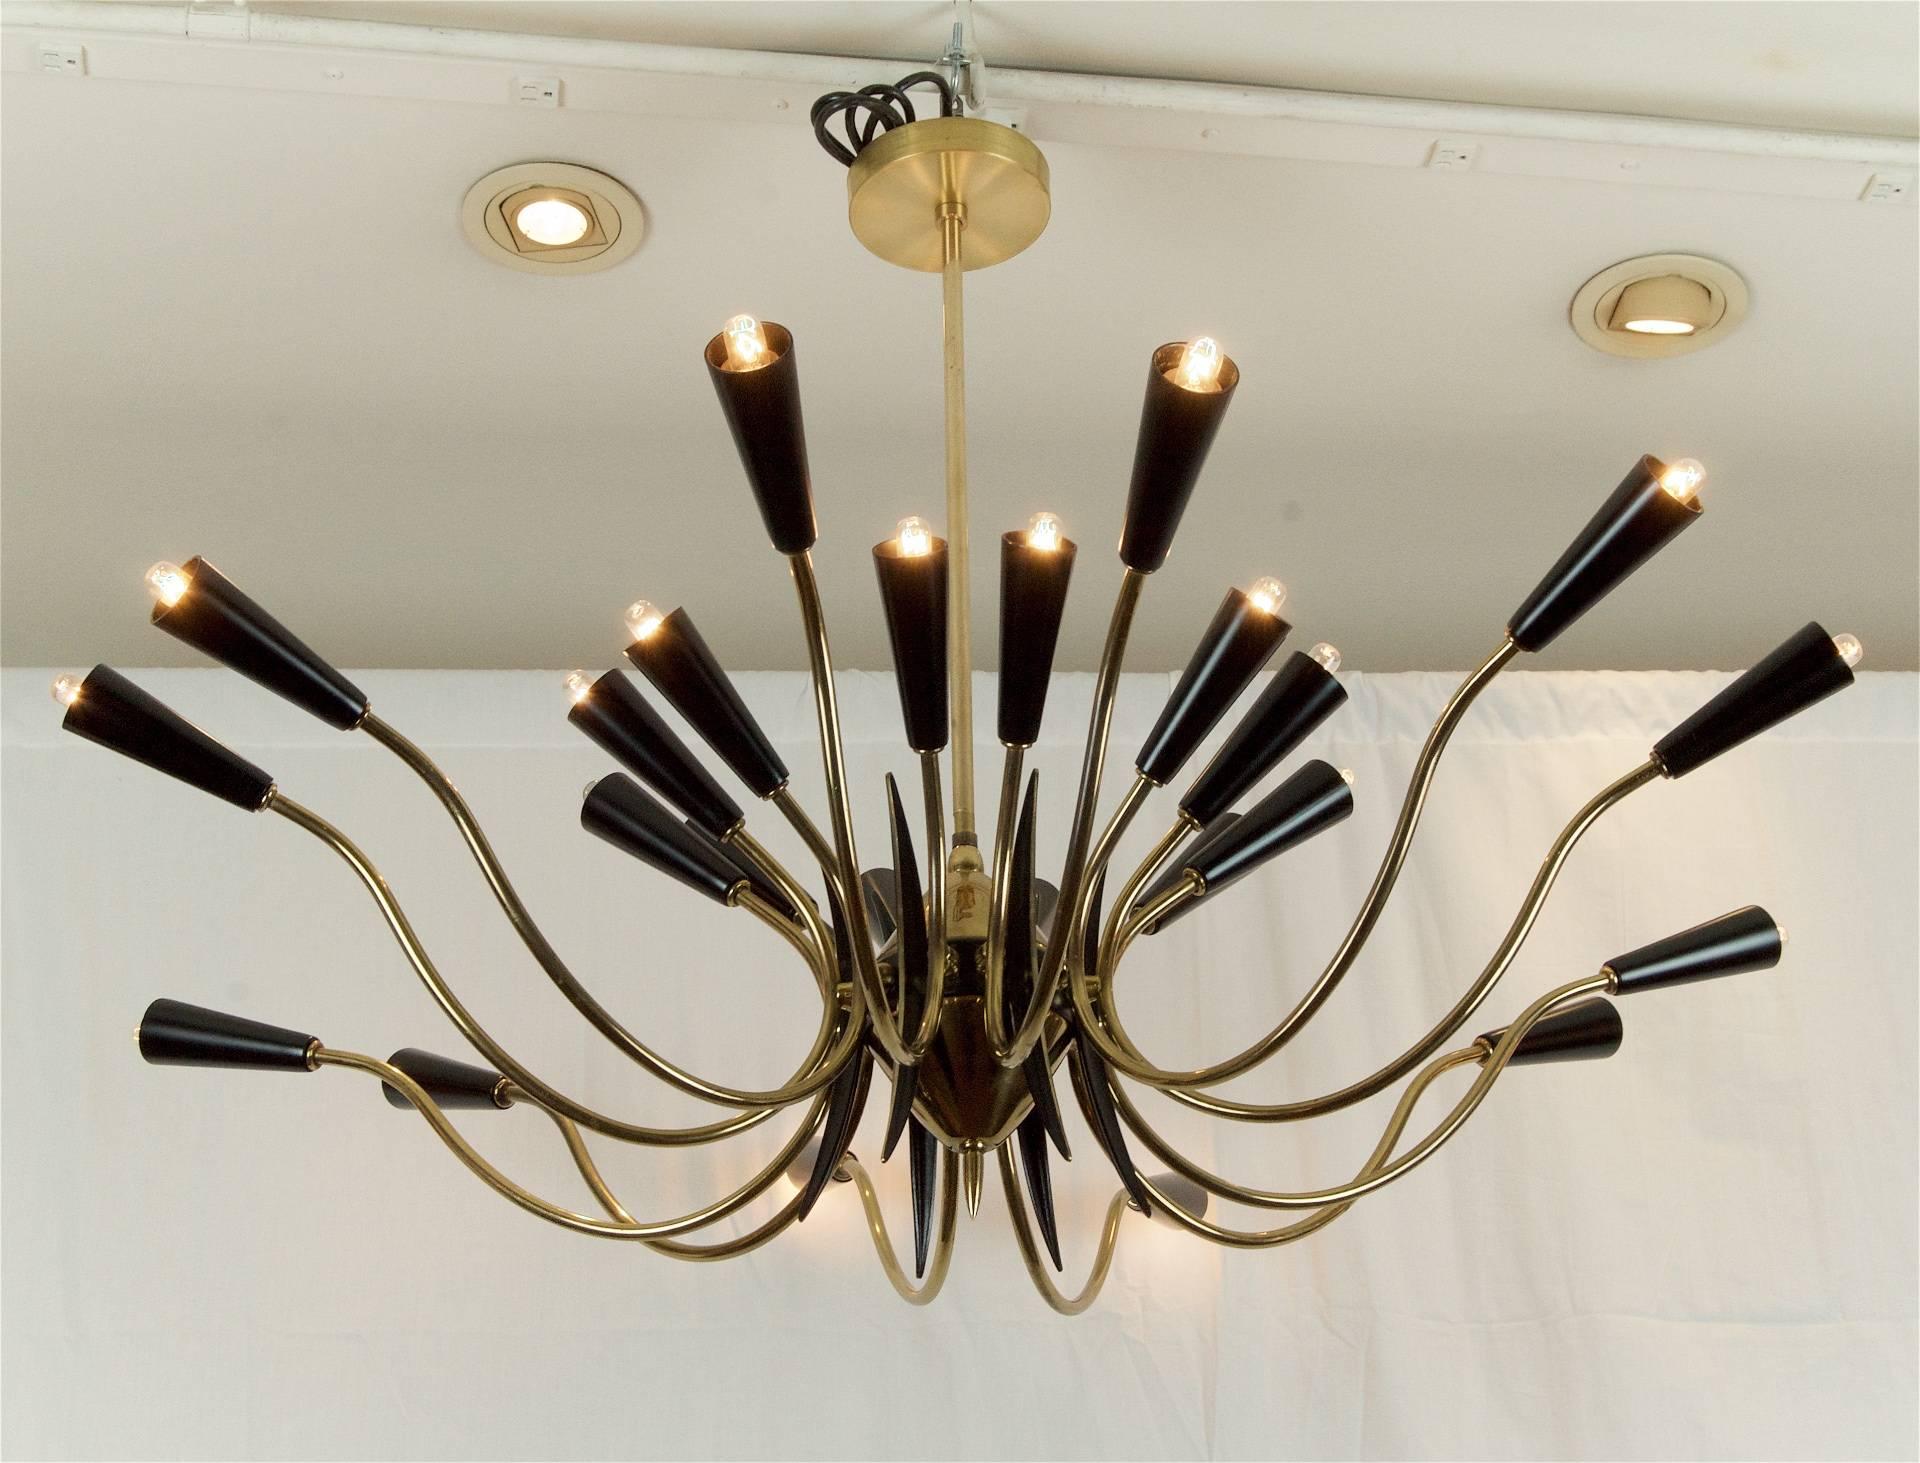 Substantial and massive 1950s Italian chandelier in the style of Stilnovo, the 24 arms of upwards and downwards facing brass capped by black enameled Bakelite 41bulb cups; the central body in enamel and brass conical form with tined black and brass